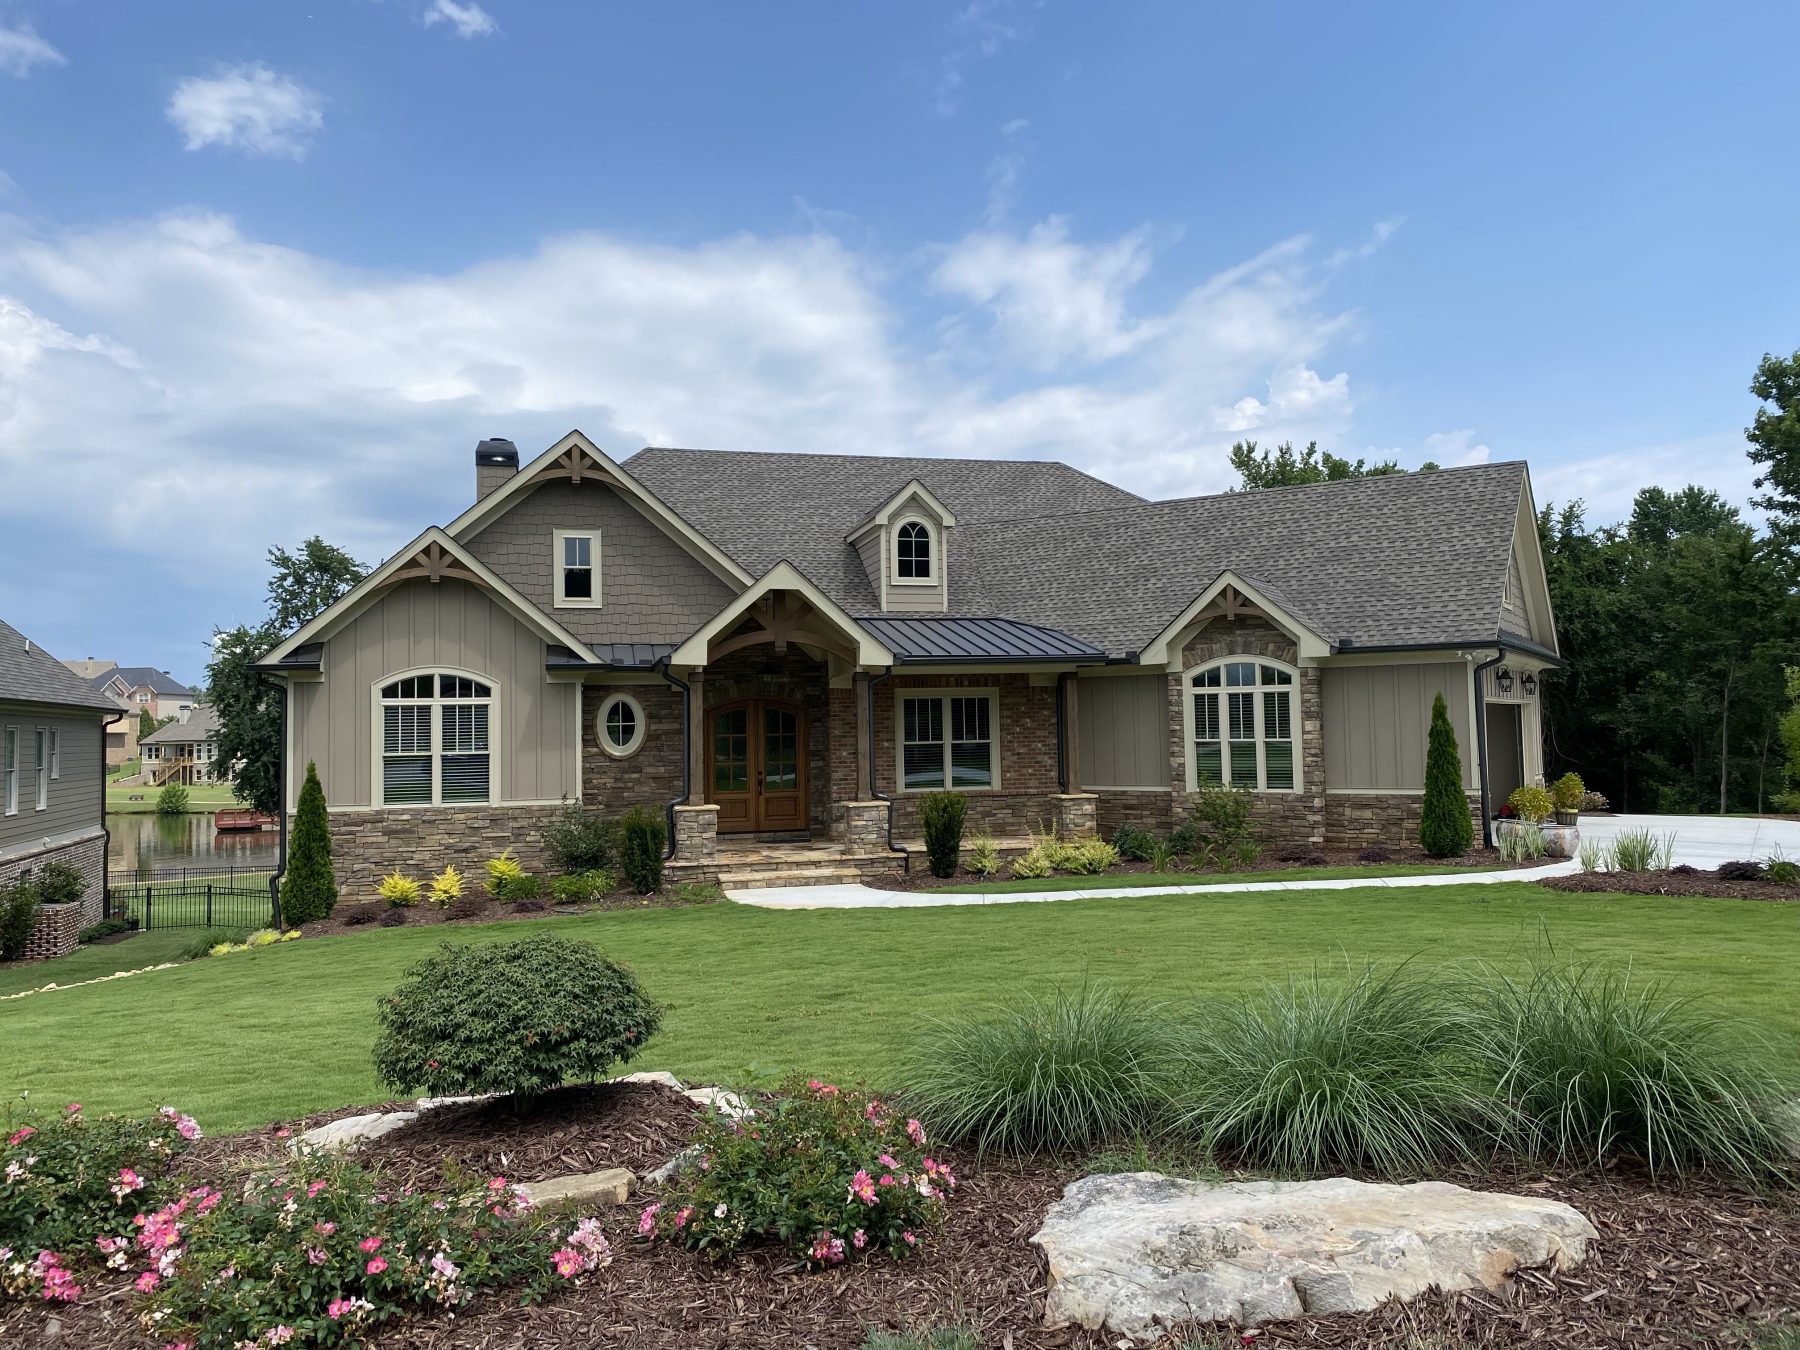 New Homes, Resort-Style Amenities, and Luxurious Lifestyle at Traditions of Braselton